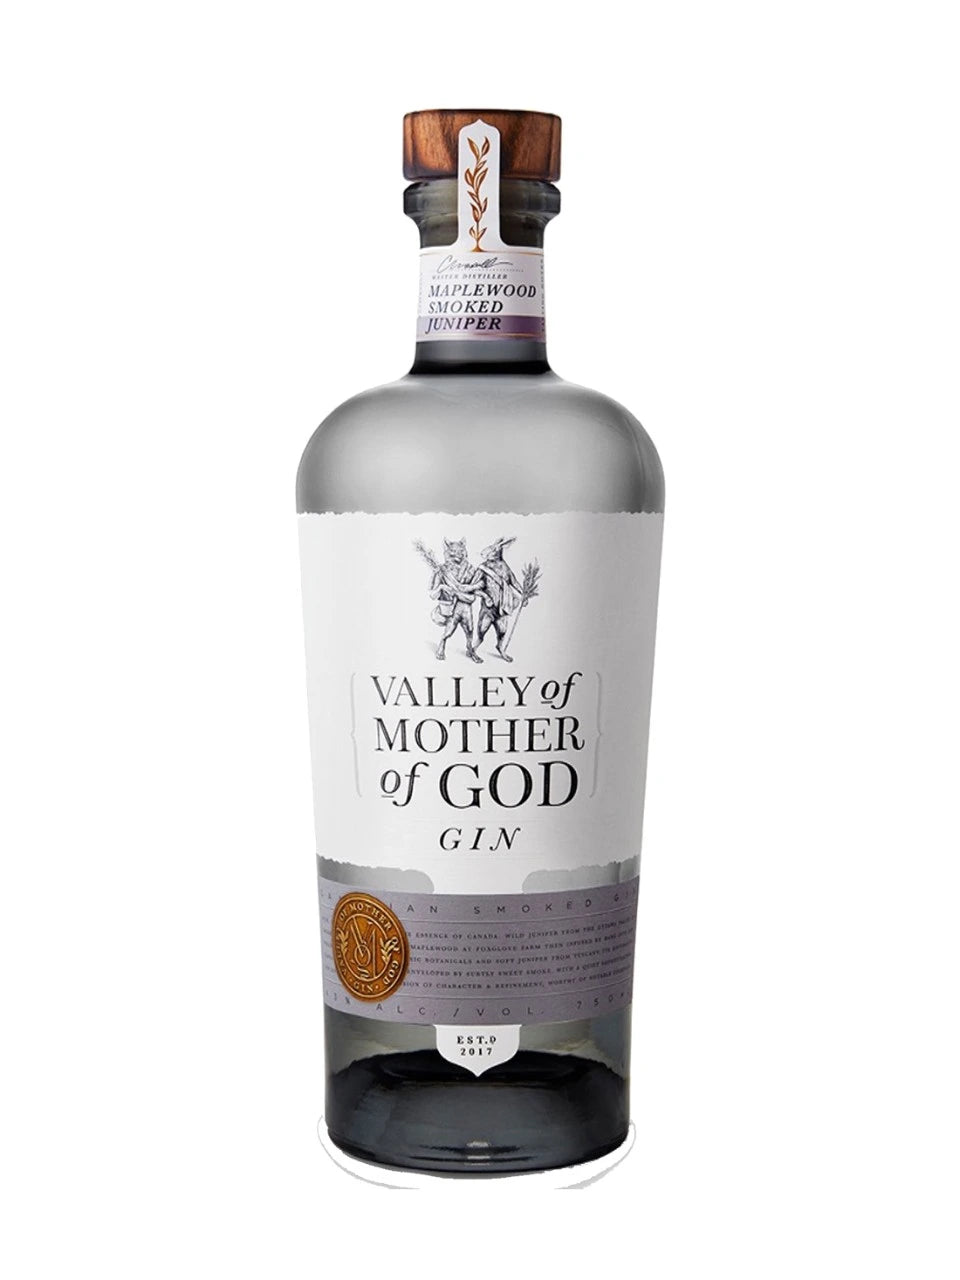 VALLEY OF MOTHER OF GOD MAPLEWOOD SMOKED JUNIPER GIN 750ML